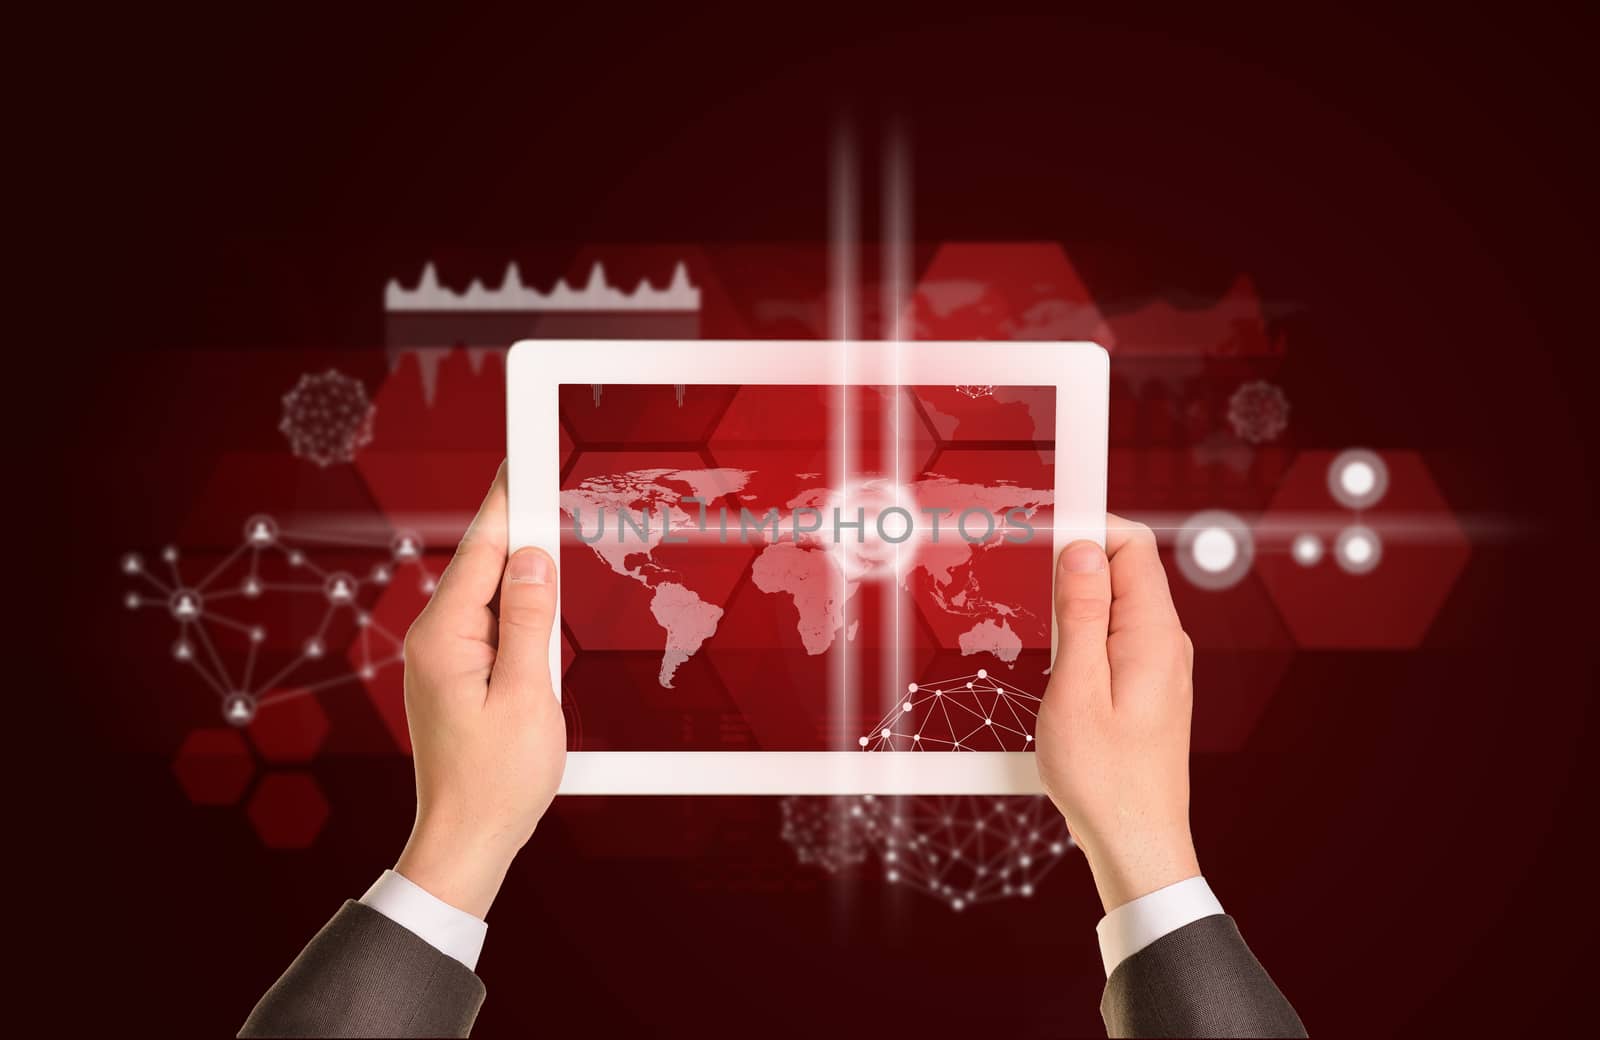 Man hands using tablet pc. Image of world map on tablet screen